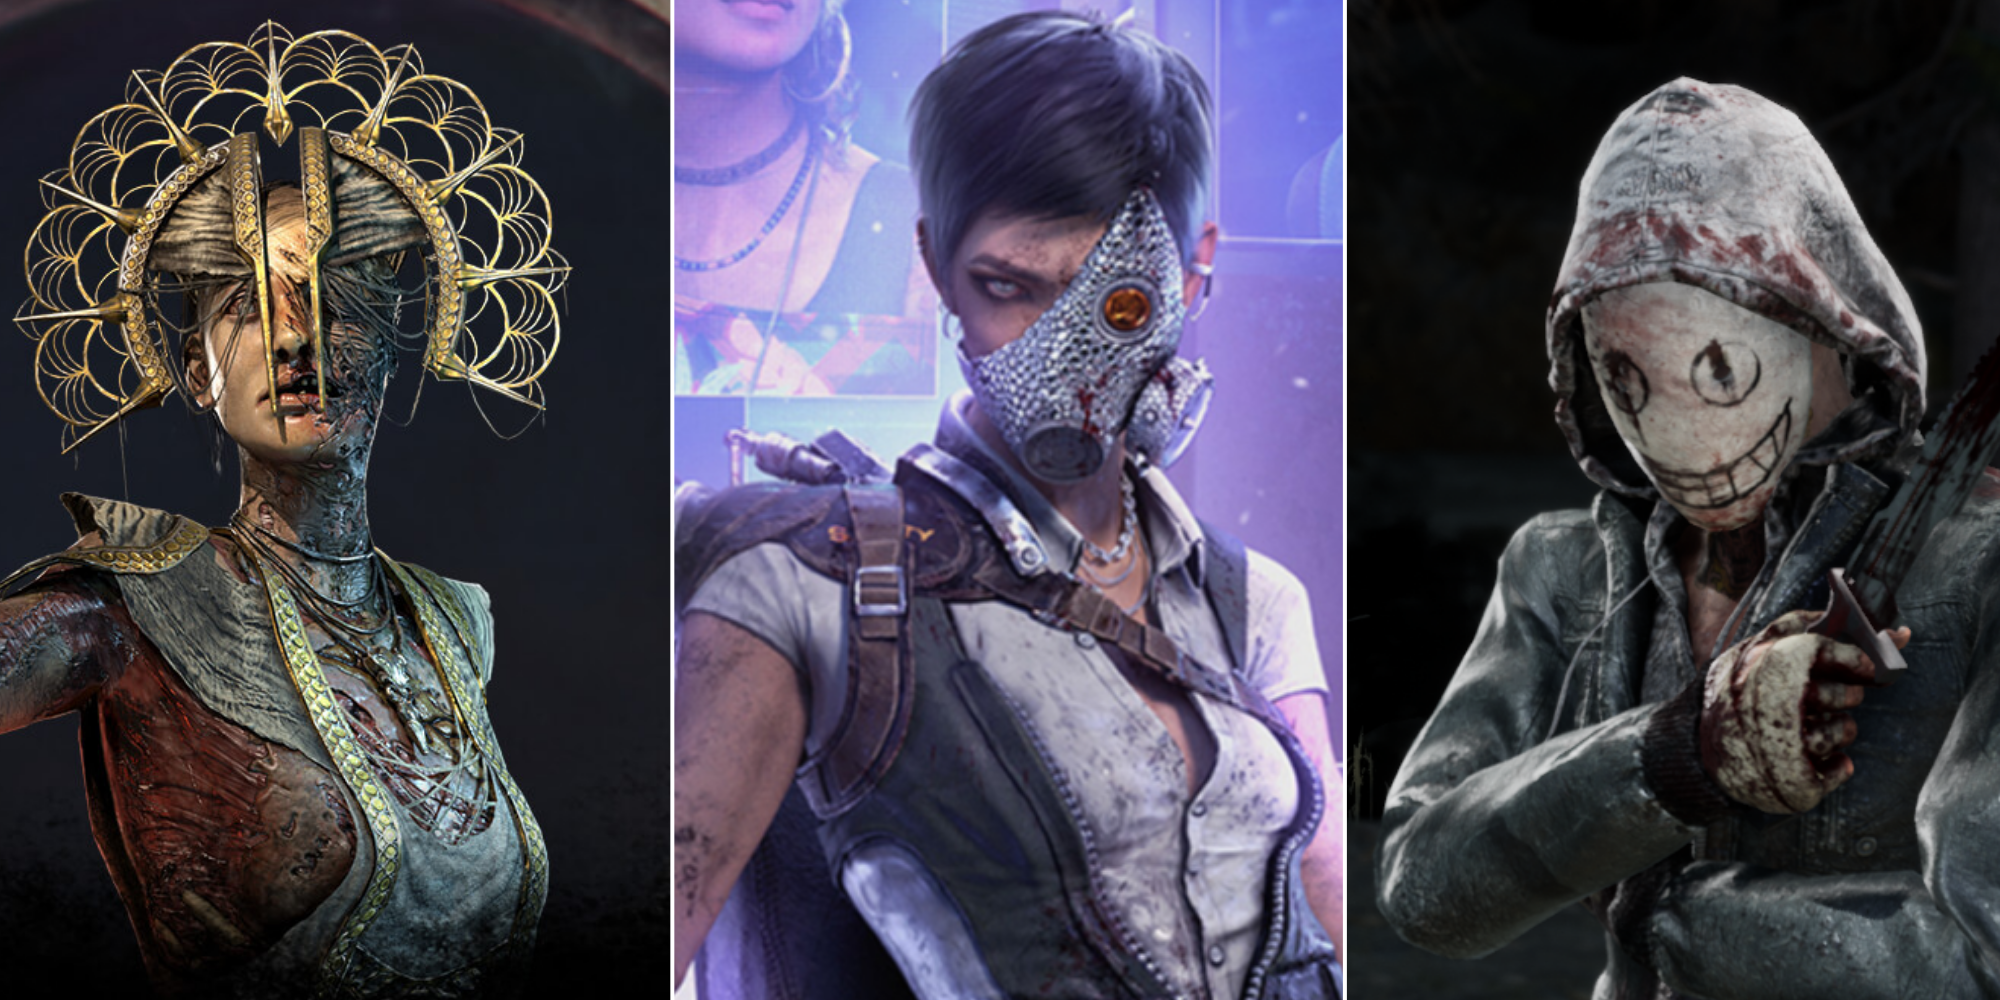 Dead By Daylight Killers The Plague, Skull Merchant, and The Legion